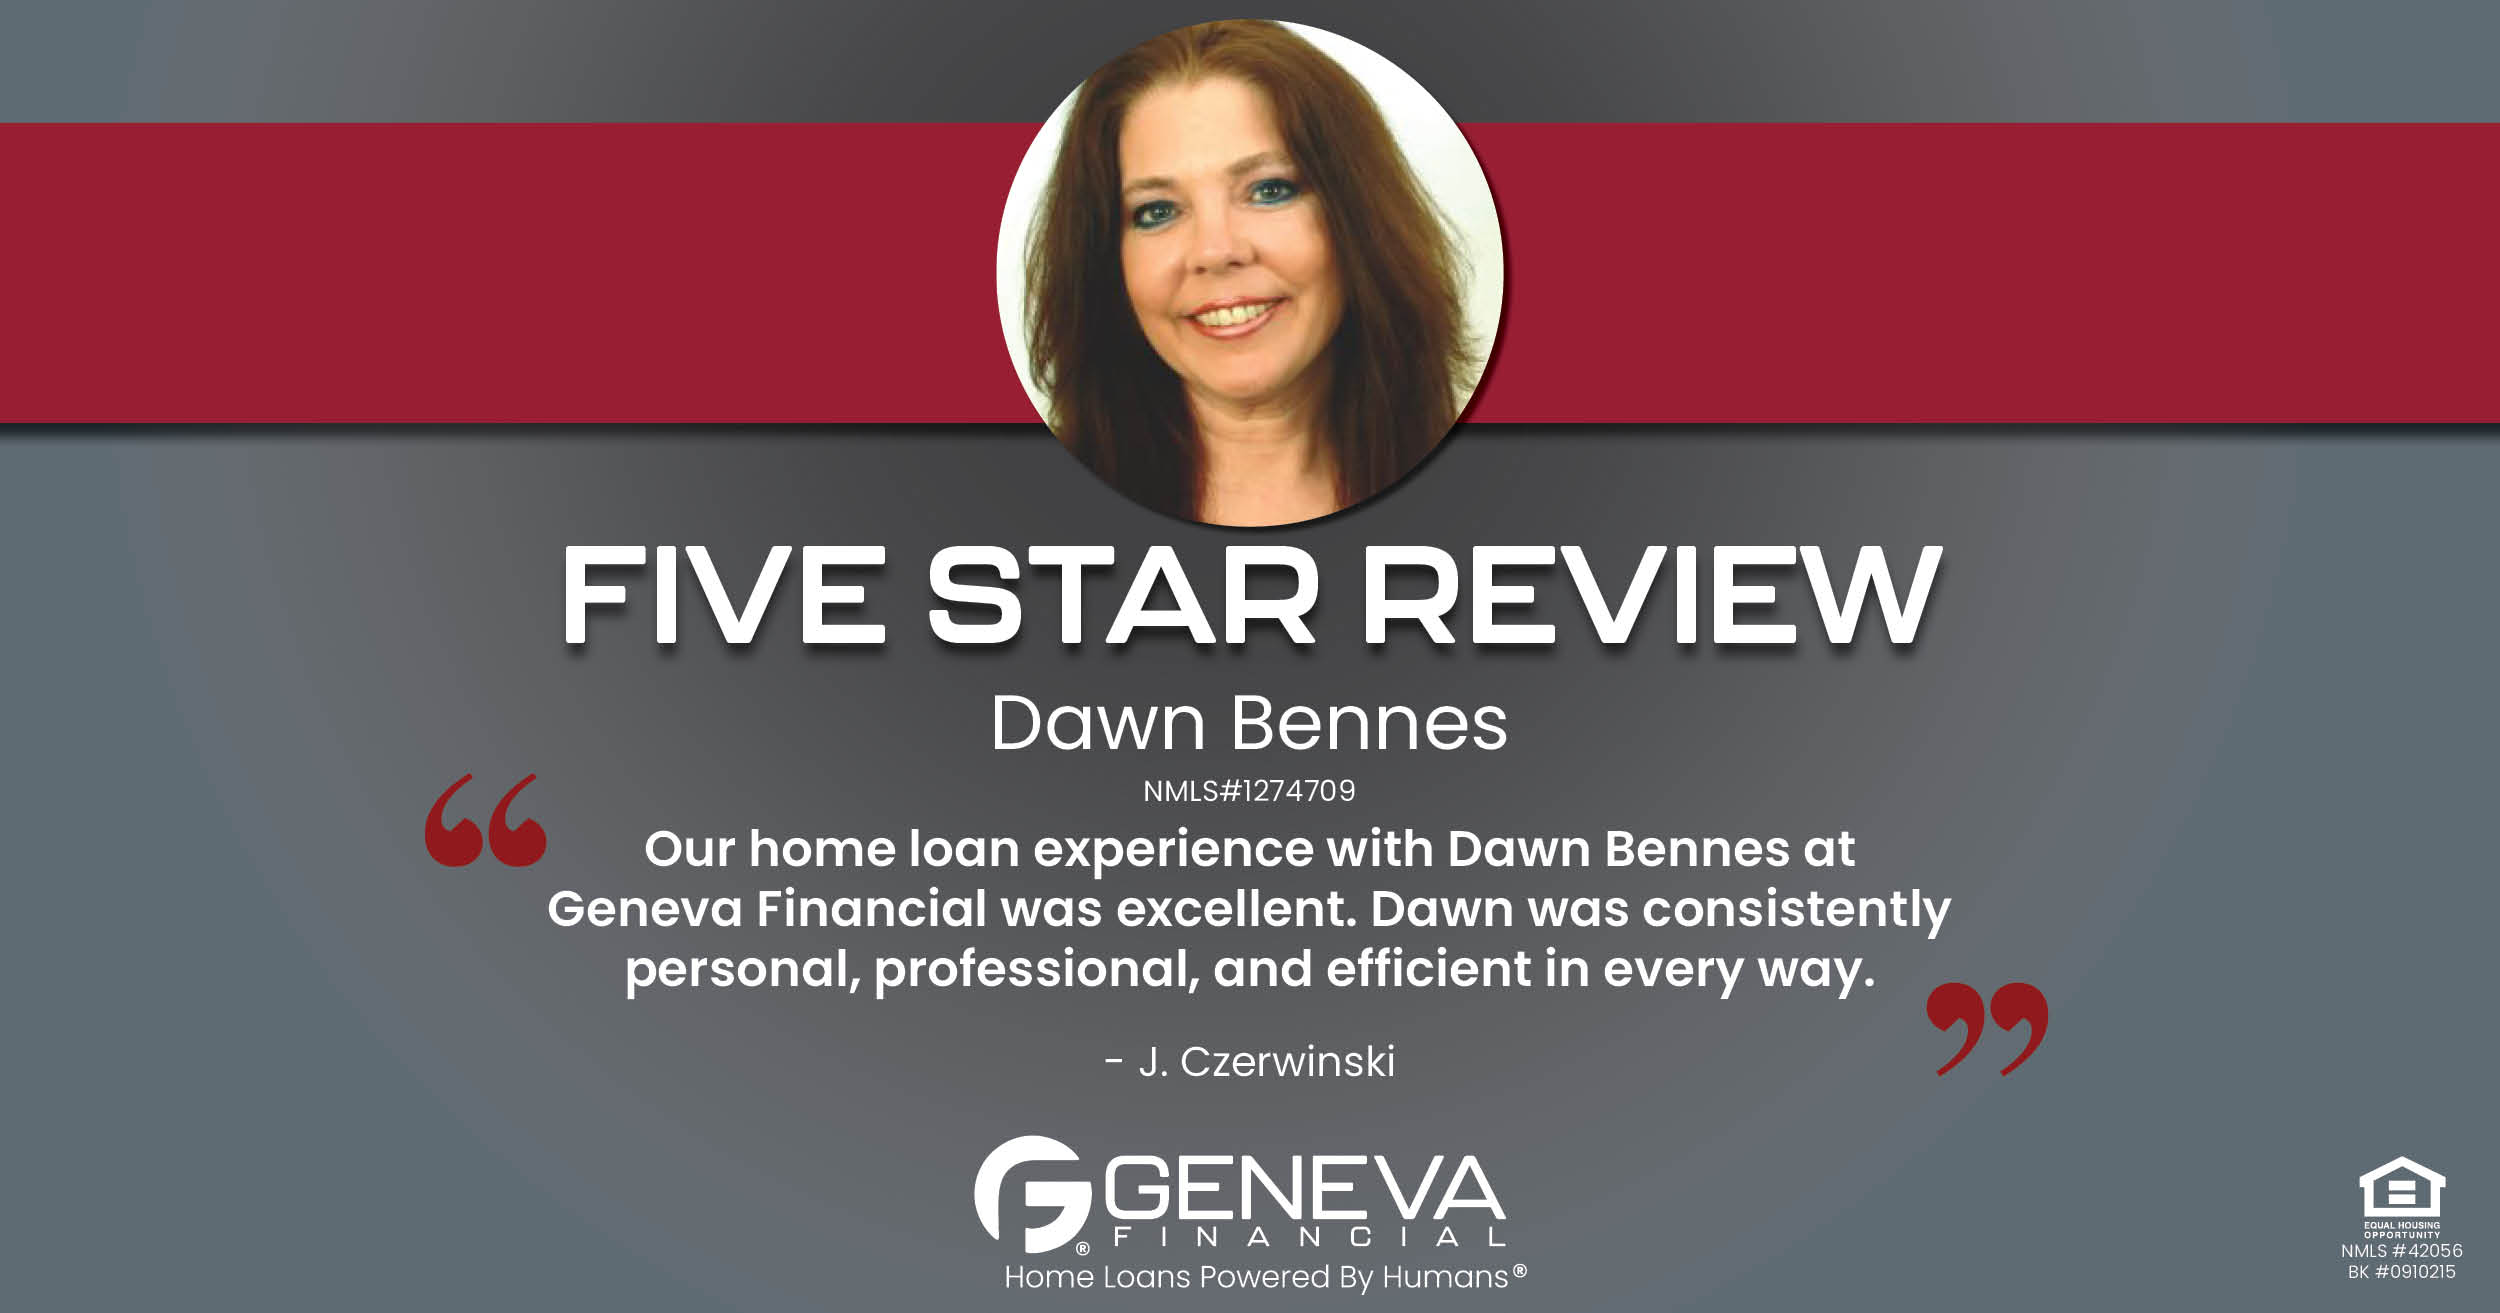 5 Star Review for Dawn Bennes, Licensed Mortgage Branch Manager with Geneva Financial, Winter Garden, FL – Home Loans Powered by Humans®.